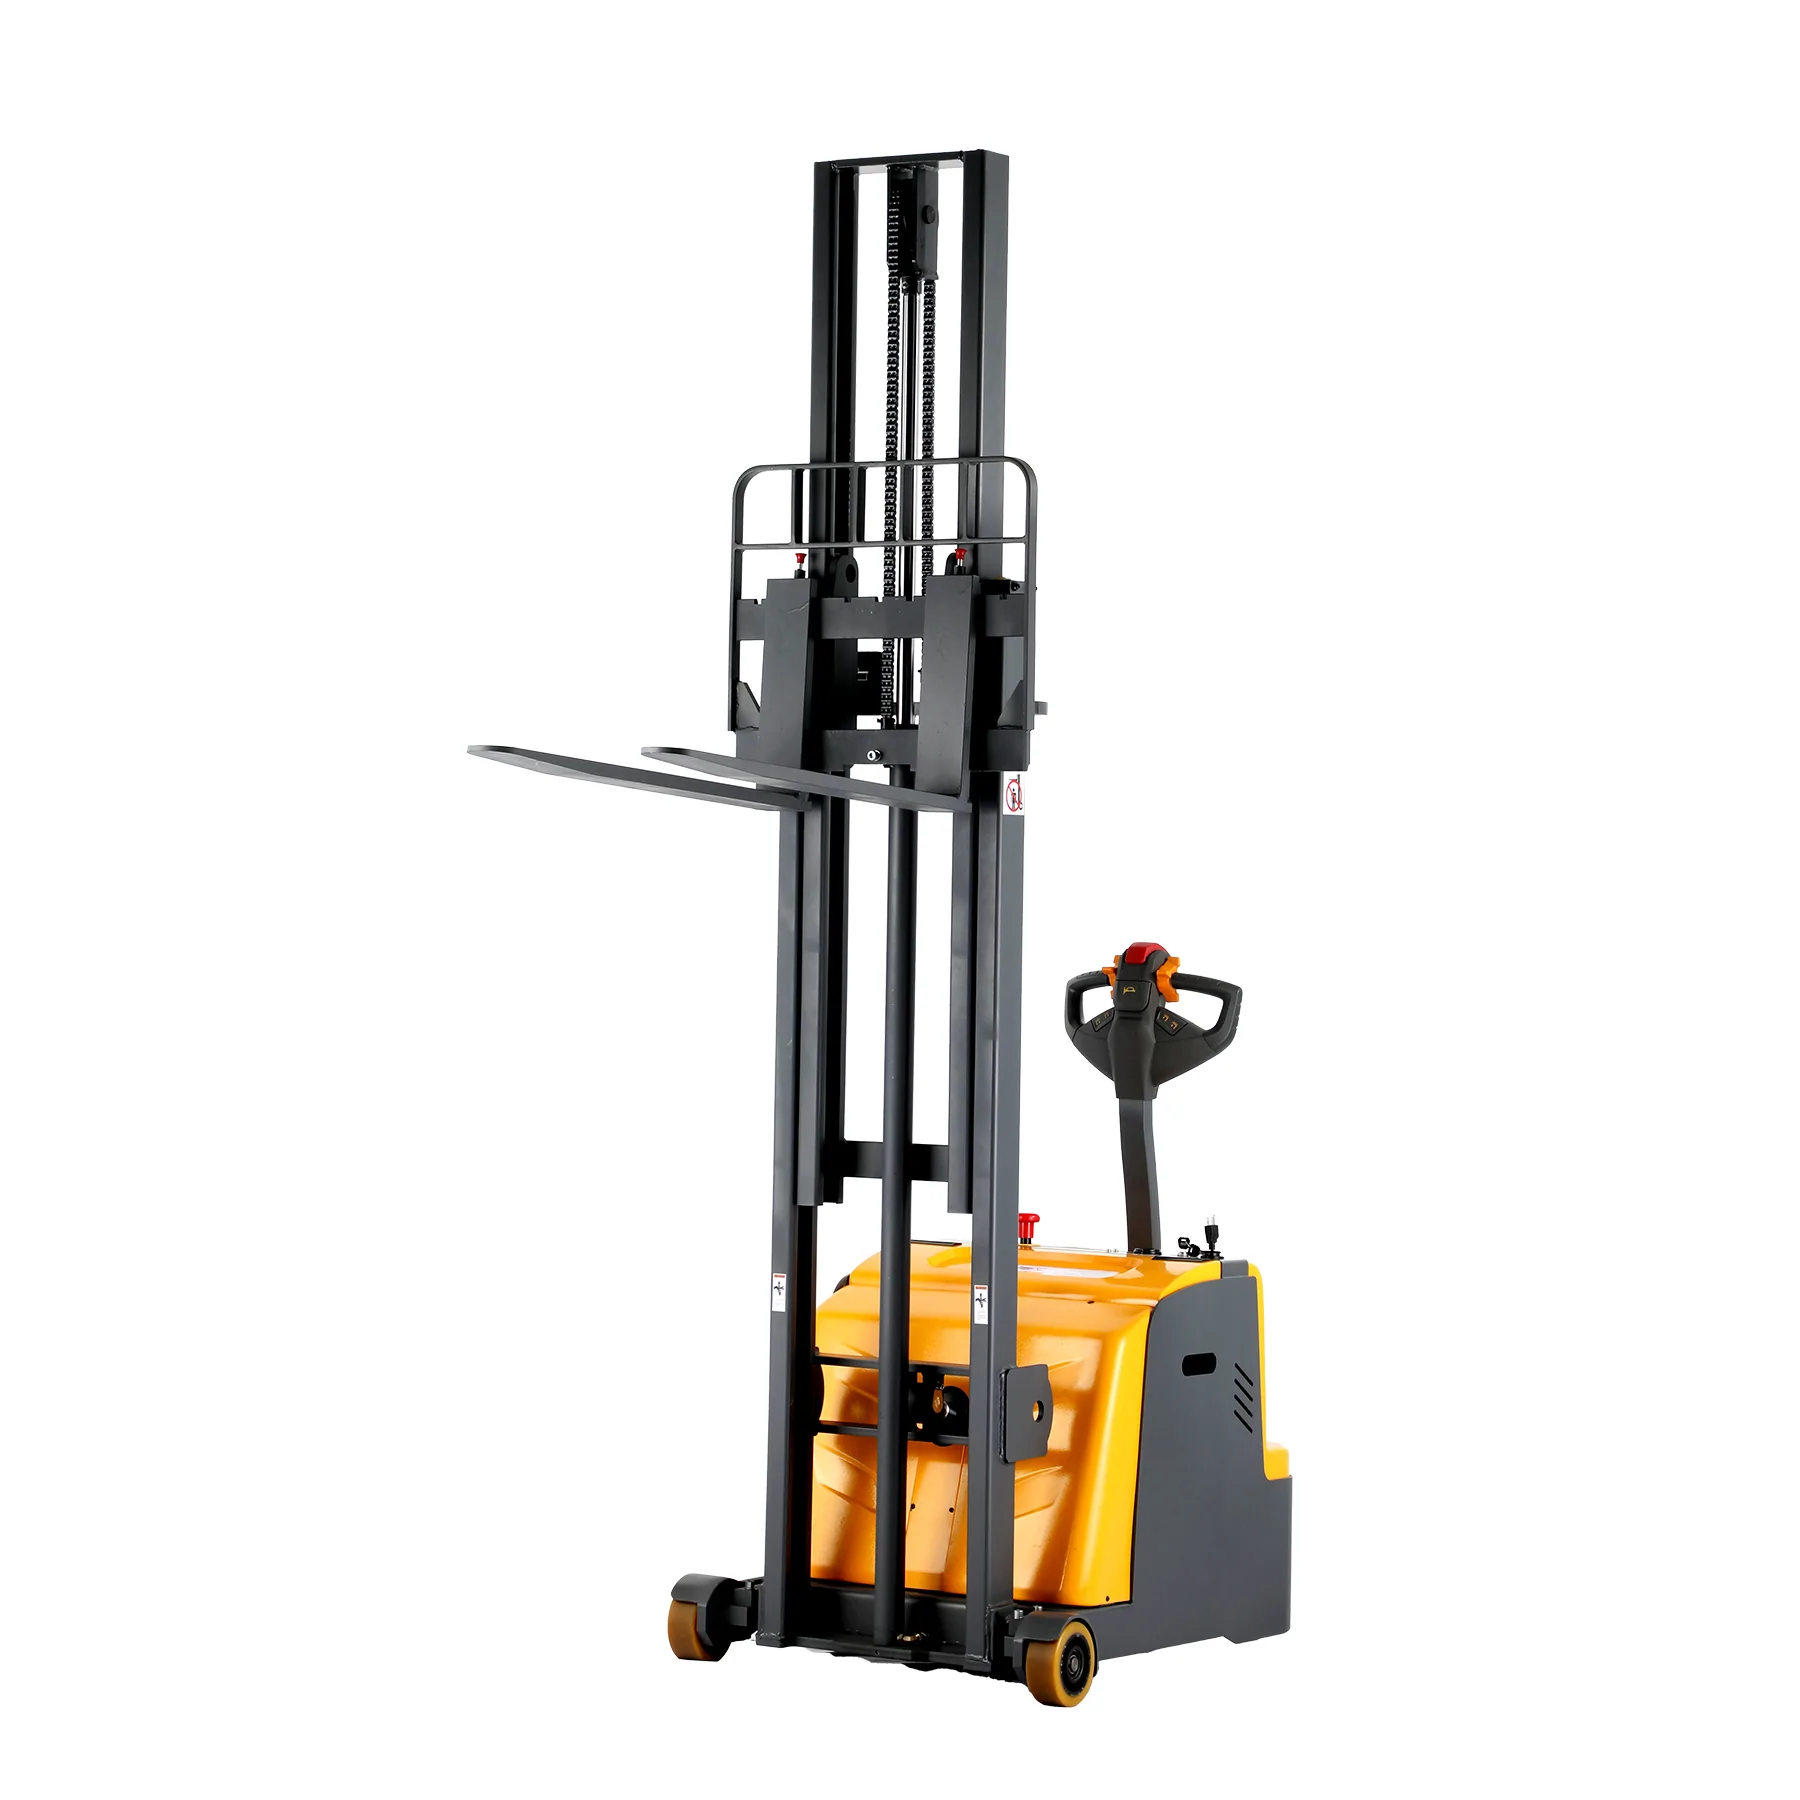 Apollolift A-3040 Counterbalanced Electric Stacker 118" Lifting Height 2200 lbs. Capacity New